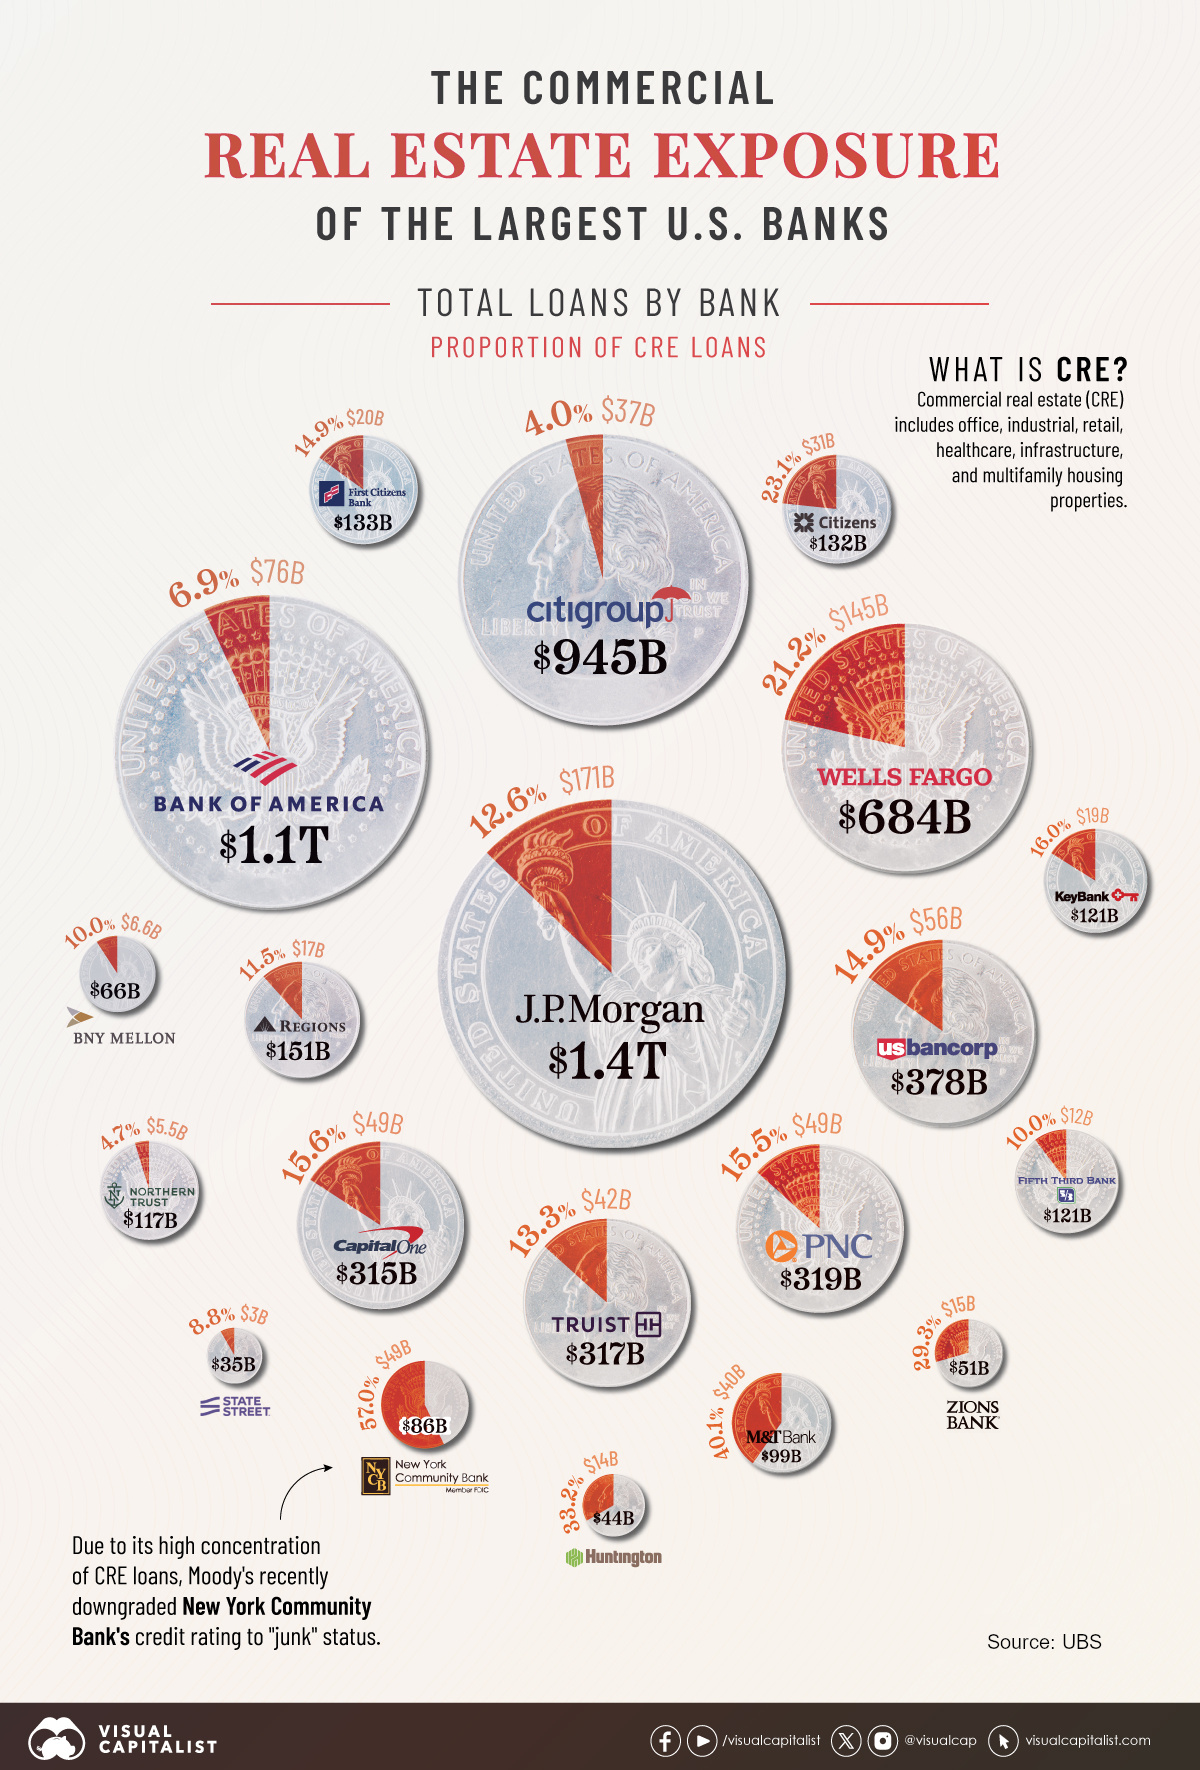 This pie chart graphic shows the commercial real estate loan exposure across the 20 largest U.S. banks by assets.